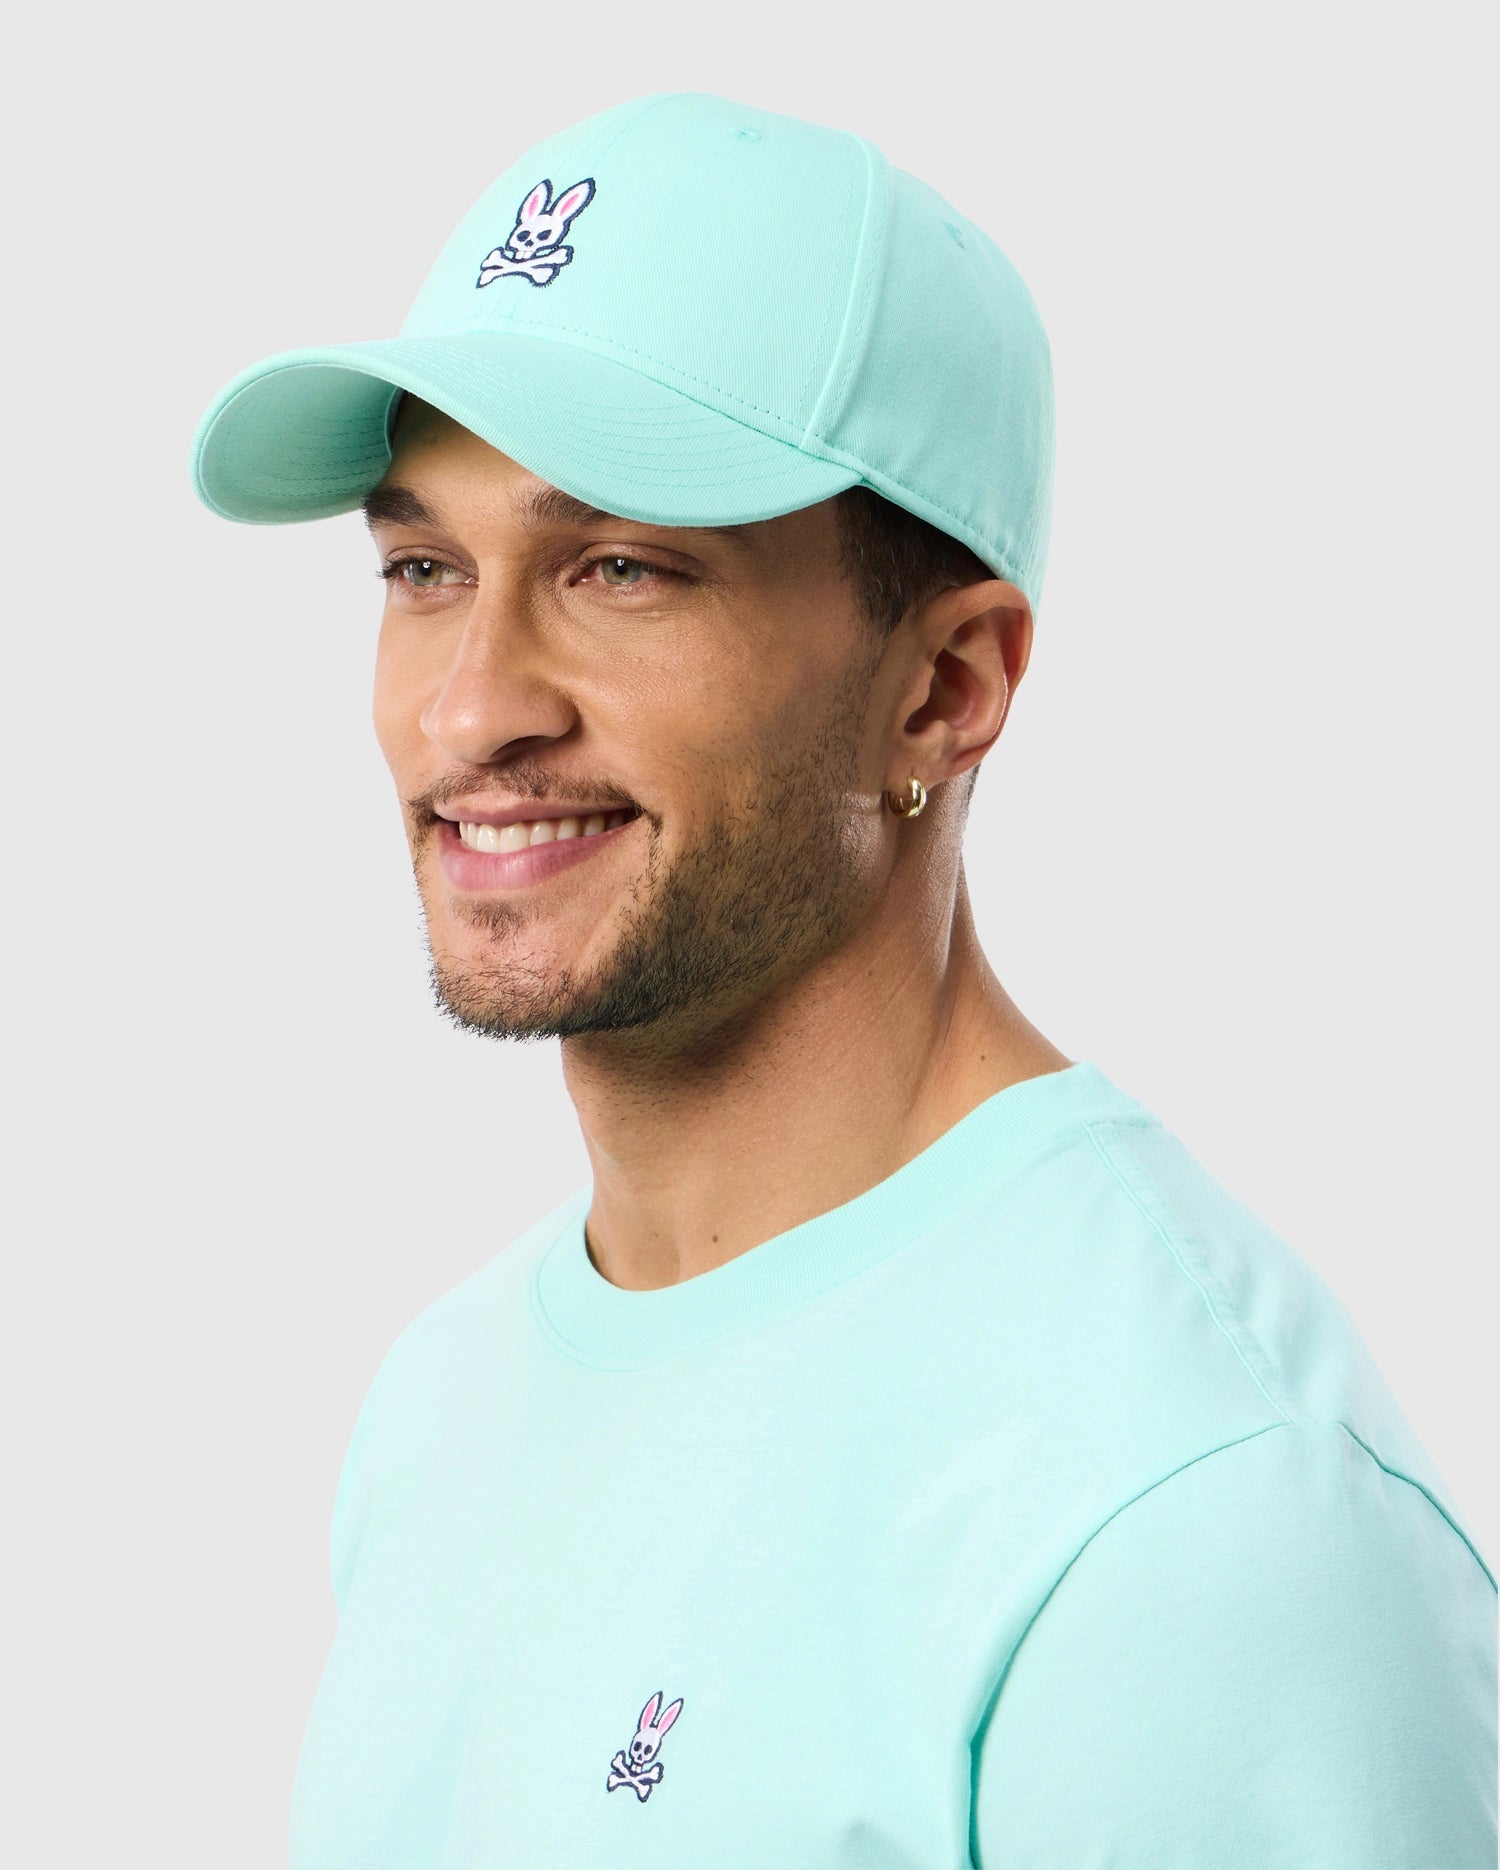 A man wearing a light blue 100% cotton t-shirt with a bunny logo and a MENS CLASSIC BASEBALL CAP - B6A816C200 by Psycho Bunny smiles while looking to the side. He has short hair, a beard, and a small hoop earring in one ear. The cap features snapback adjustability. The background is plain and light-colored.